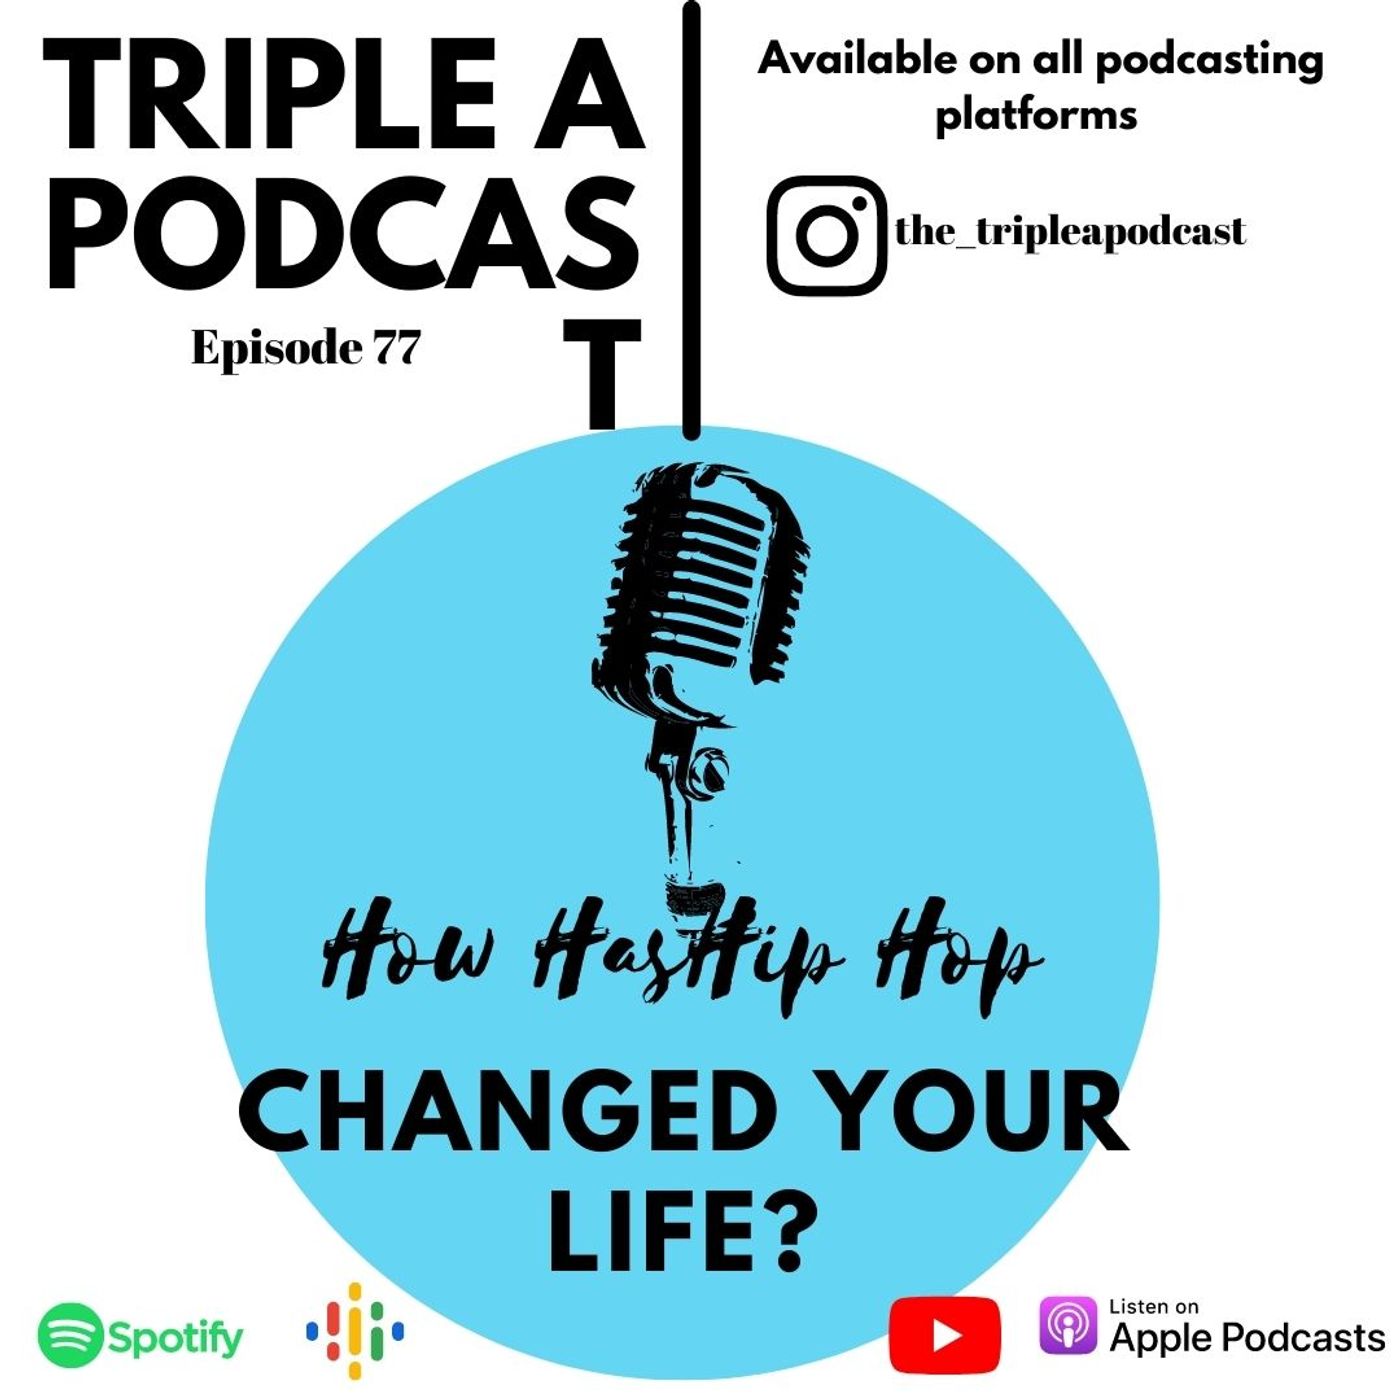 Triple A Podcast - "How Has Hip Hop Changed Your Life?" EP77